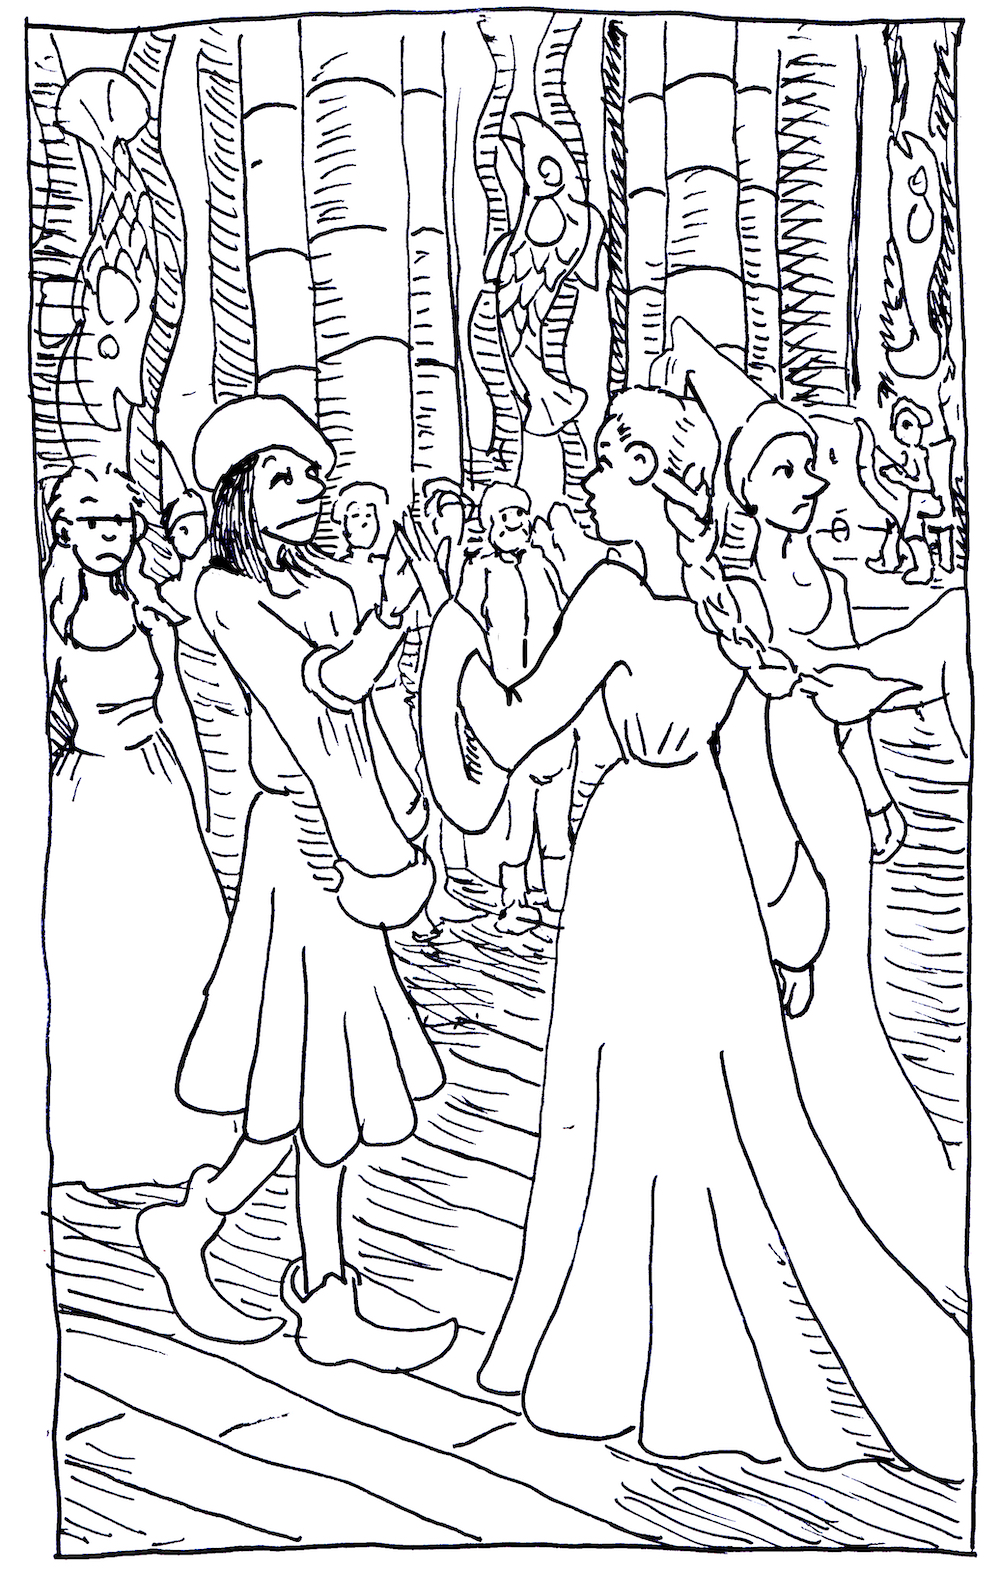 asoiaf a storm of ice and fire storm of swords pen and ink illustration petyr baelish littlefinger lysa catelyn baelish riverrun dance